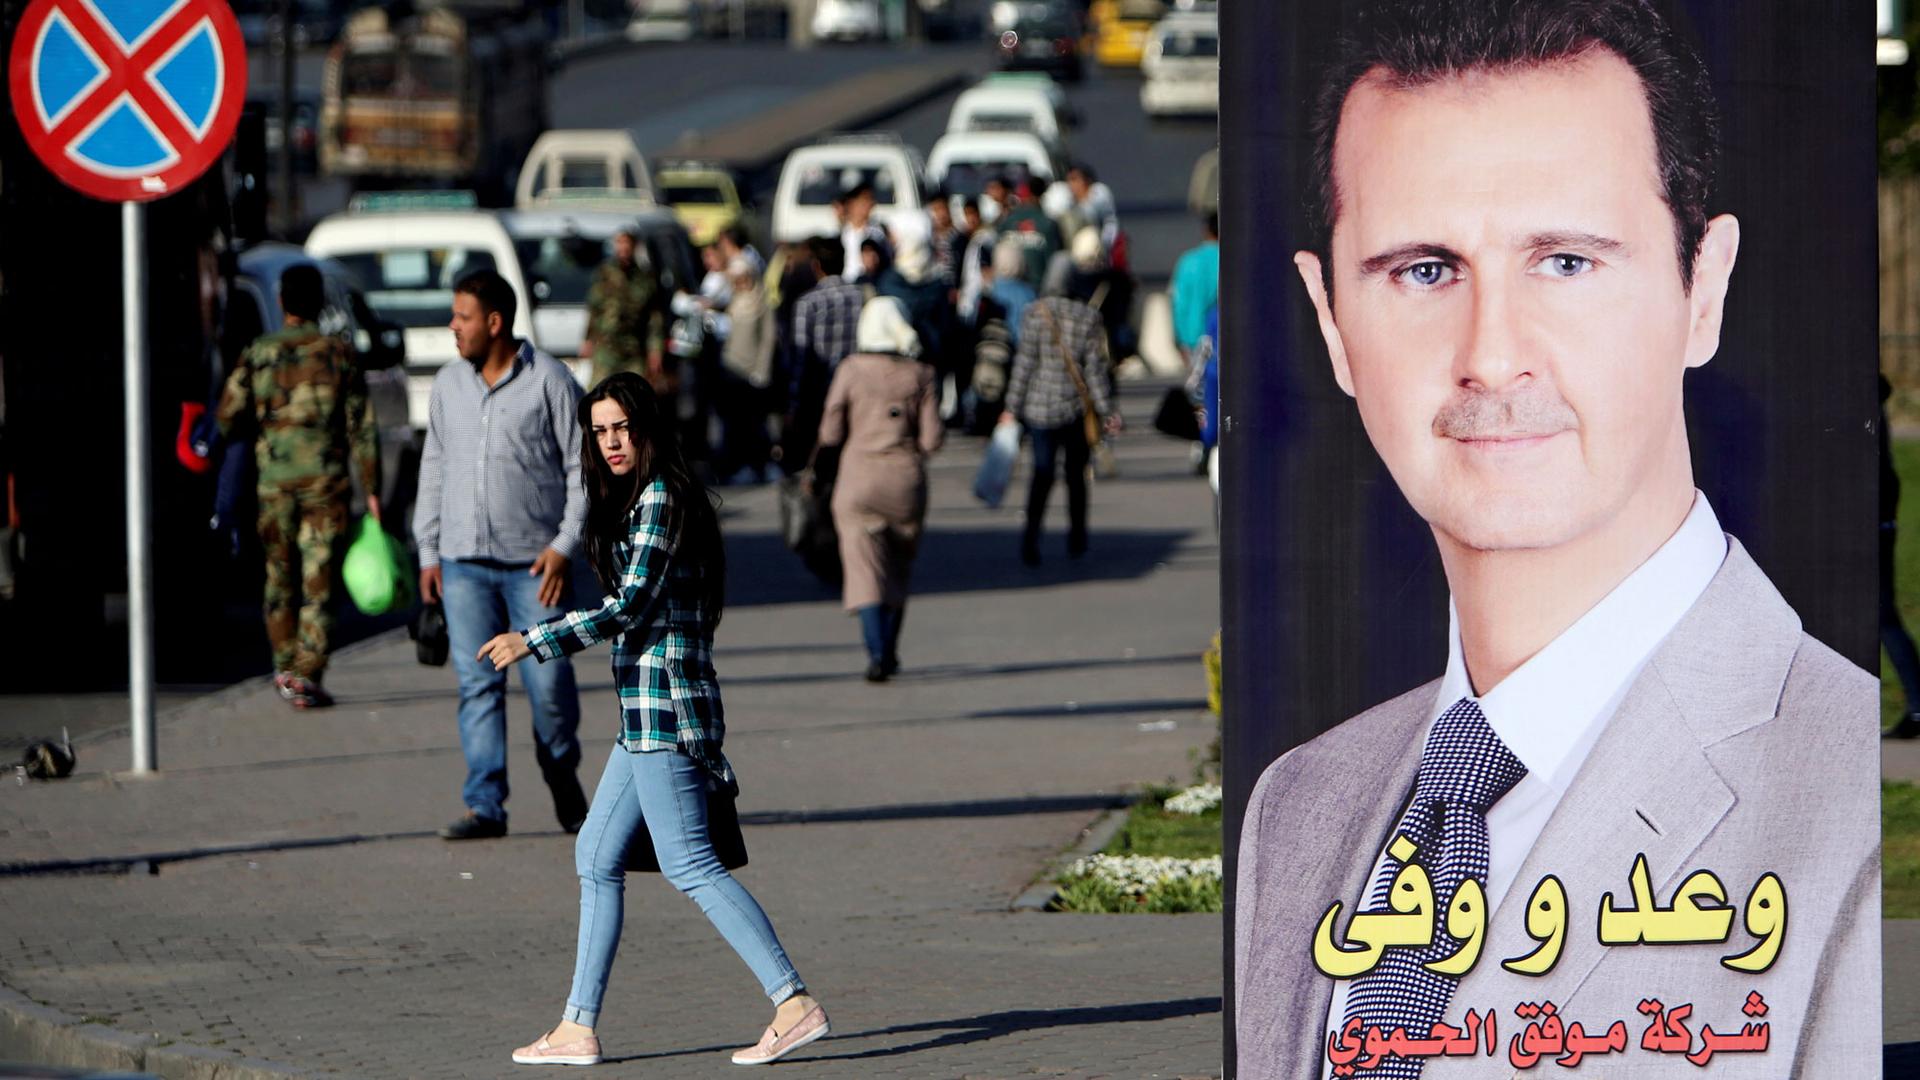 A woman walks wearing jeans and a plaid shirt is shown near a picture of Syrian President Bashar al-Assad in Damascus.